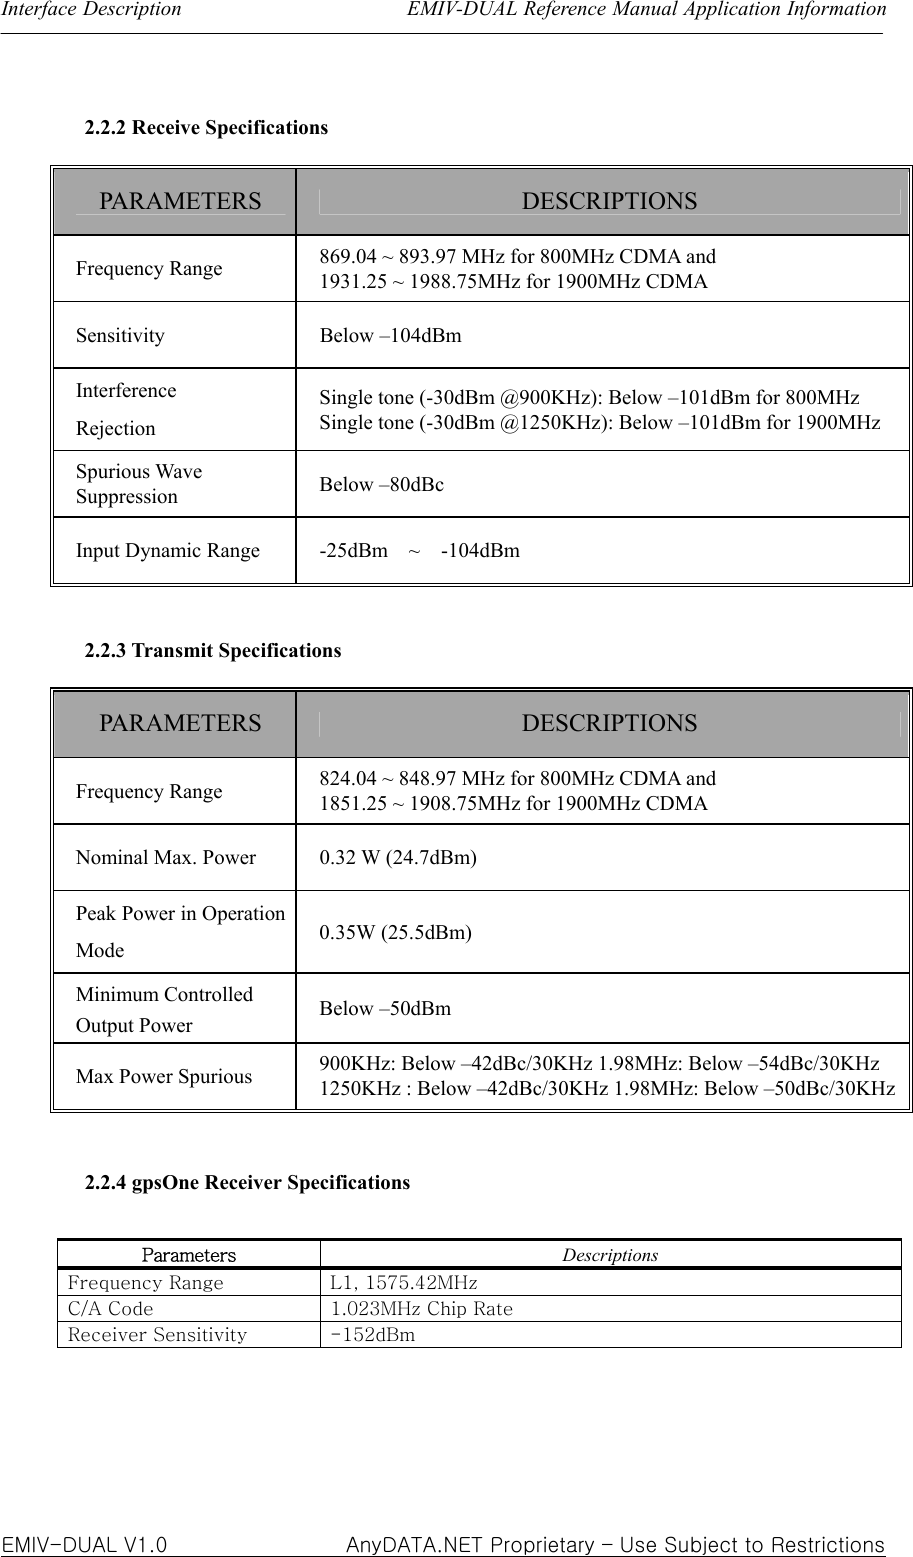 Interface Description                      EMIV-DUAL Reference Manual Application Information  EMIV-DUAL V1.0                 AnyDATA.NET Proprietary – Use Subject to Restrictions   2.2.2 Receive Specifications  PARAMETERS  DESCRIPTIONS Frequency Range  869.04 ~ 893.97 MHz for 800MHz CDMA and 1931.25 ~ 1988.75MHz for 1900MHz CDMA Sensitivity Below –104dBm Interference Rejection Single tone (-30dBm @900KHz): Below –101dBm for 800MHz   Single tone (-30dBm @1250KHz): Below –101dBm for 1900MHz Spurious Wave Suppression  Below –80dBc Input Dynamic Range  -25dBm  ~  -104dBm     2.2.3 Transmit Specifications  PARAMETERS  DESCRIPTIONS Frequency Range  824.04 ~ 848.97 MHz for 800MHz CDMA and 1851.25 ~ 1908.75MHz for 1900MHz CDMA Nominal Max. Power  0.32 W (24.7dBm) Peak Power in Operation Mode  0.35W (25.5dBm) Minimum Controlled Output Power  Below –50dBm Max Power Spurious  900KHz: Below –42dBc/30KHz 1.98MHz: Below –54dBc/30KHz 1250KHz : Below –42dBc/30KHz 1.98MHz: Below –50dBc/30KHz  2.2.4 gpsOne Receiver Specifications  Parameters  Descriptions Frequency Range  L1, 1575.42MHz C/A Code  1.023MHz Chip Rate Receiver Sensitivity  -152dBm     